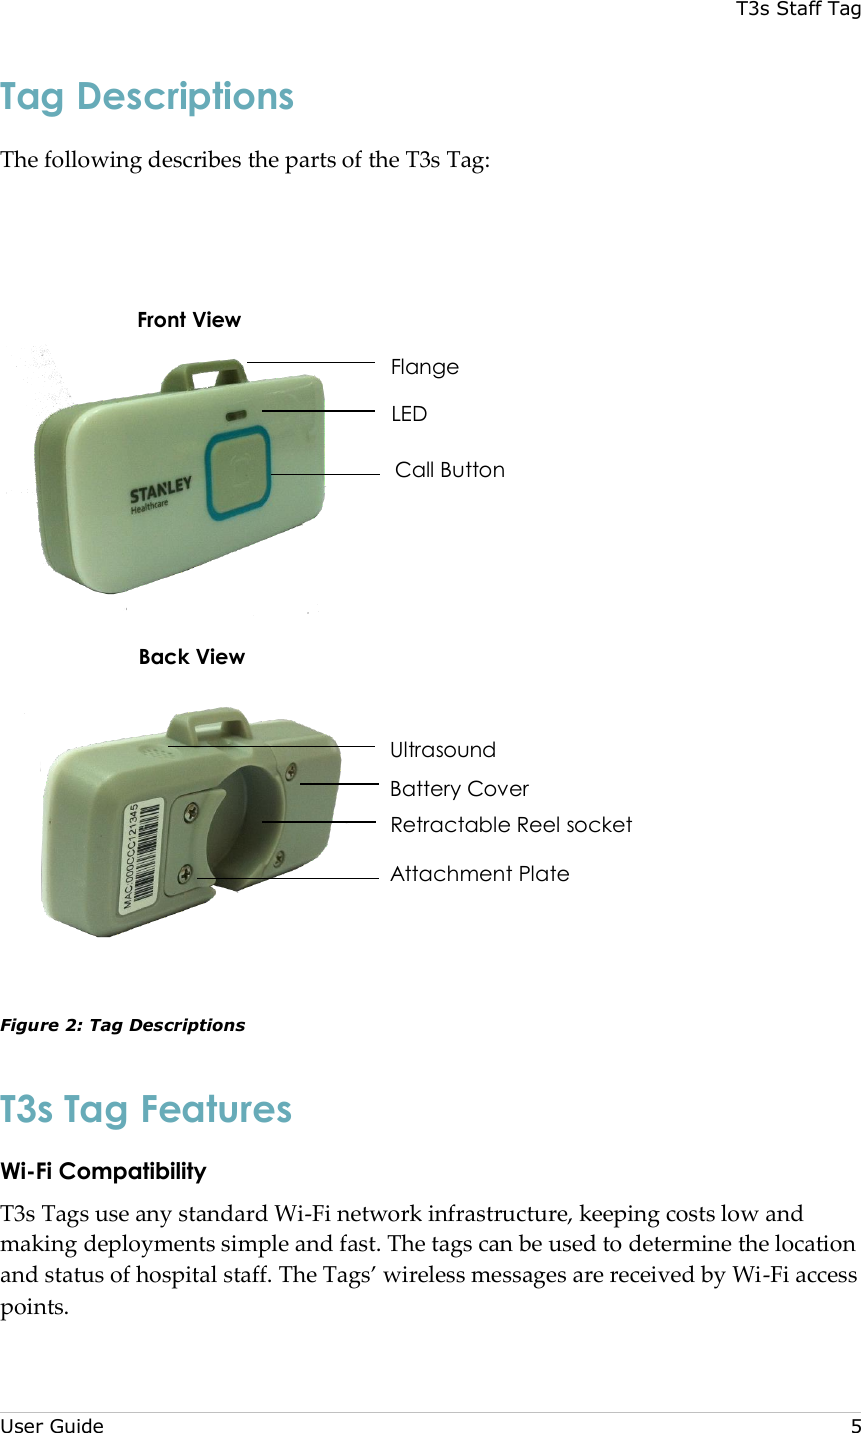 T3s Staff Tag  User Guide     5 Tag Descriptions The following describes the parts of the T3s Tag:        Figure 2: Tag Descriptions T3s Tag Features Wi-Fi Compatibility T3s Tags use any standard Wi-Fi network infrastructure, keeping costs low and making deployments simple and fast. The tags can be used to determine the location and status of hospital staff. The Tags’ wireless messages are received by Wi-Fi access points.  Front View Back View Flange LED Call Button Ultrasound Battery Cover Retractable Reel socket Attachment Plate 